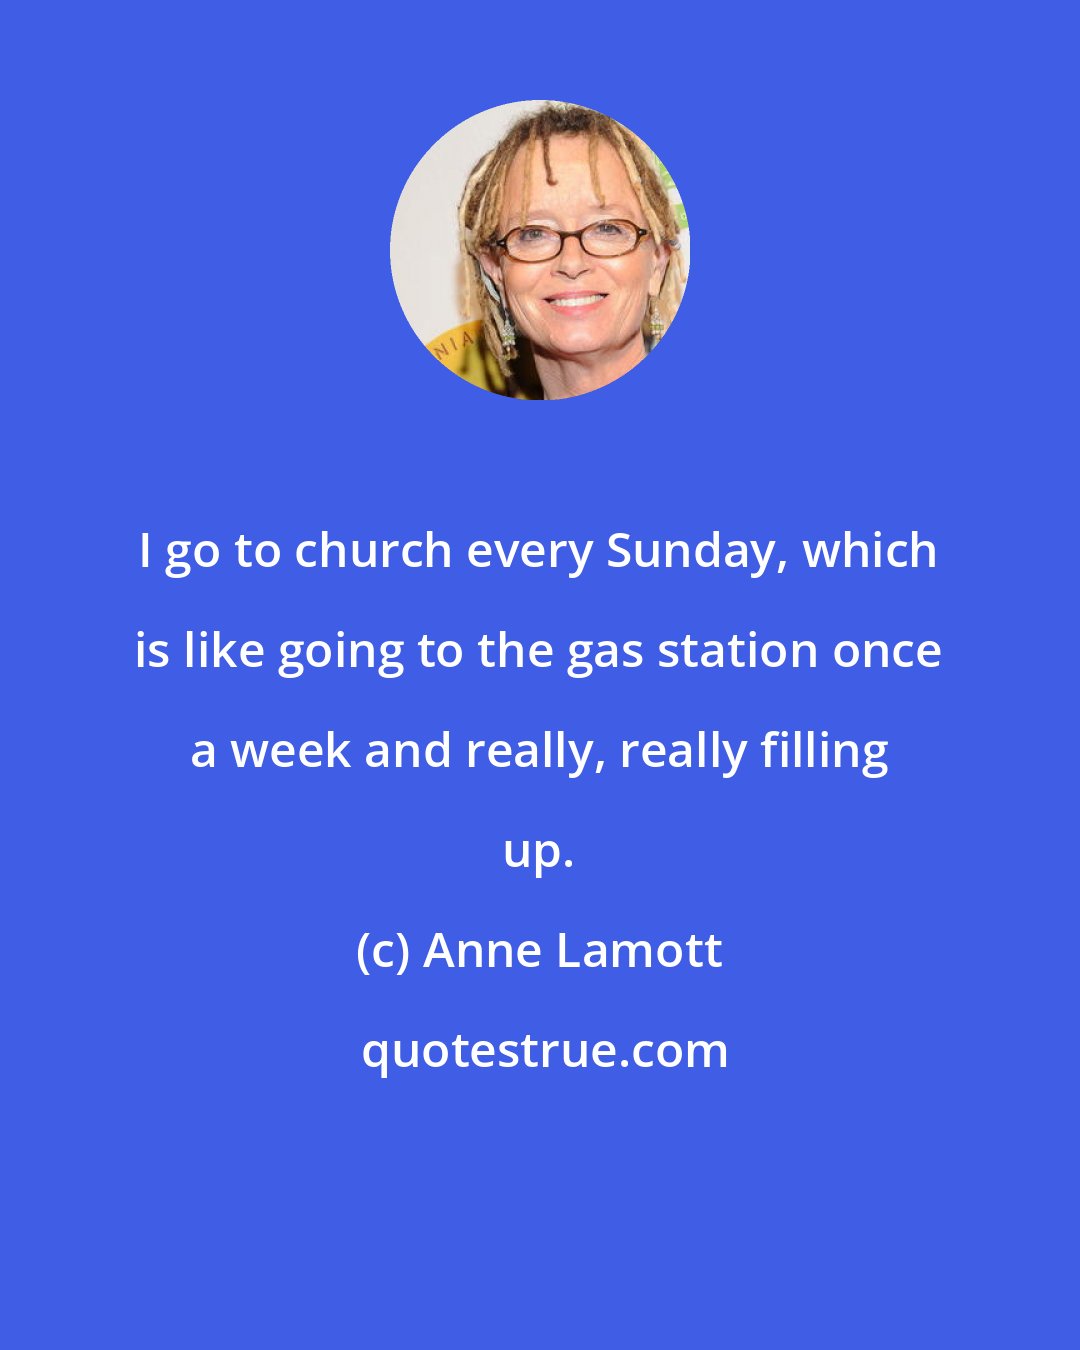 Anne Lamott: I go to church every Sunday, which is like going to the gas station once a week and really, really filling up.